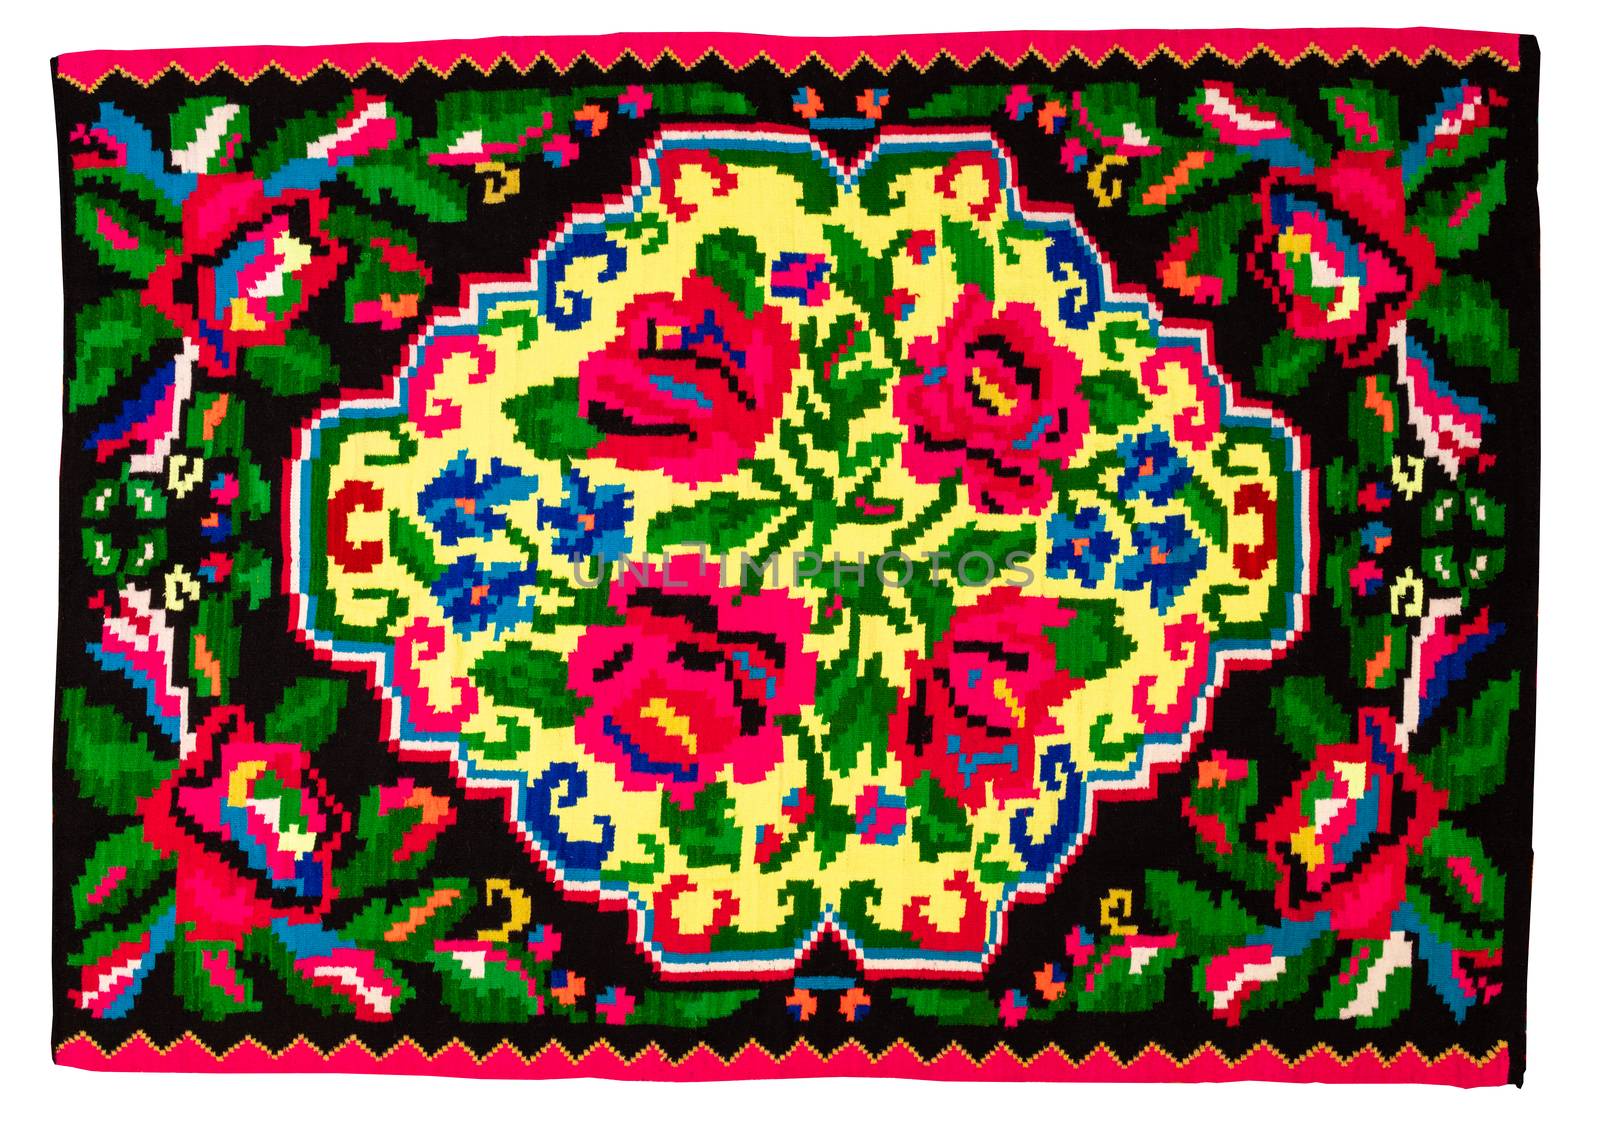 Colorful vintage handmade rug with geometrical shapes and motifs traditional of Maramures region of Romania isolated on a white background.